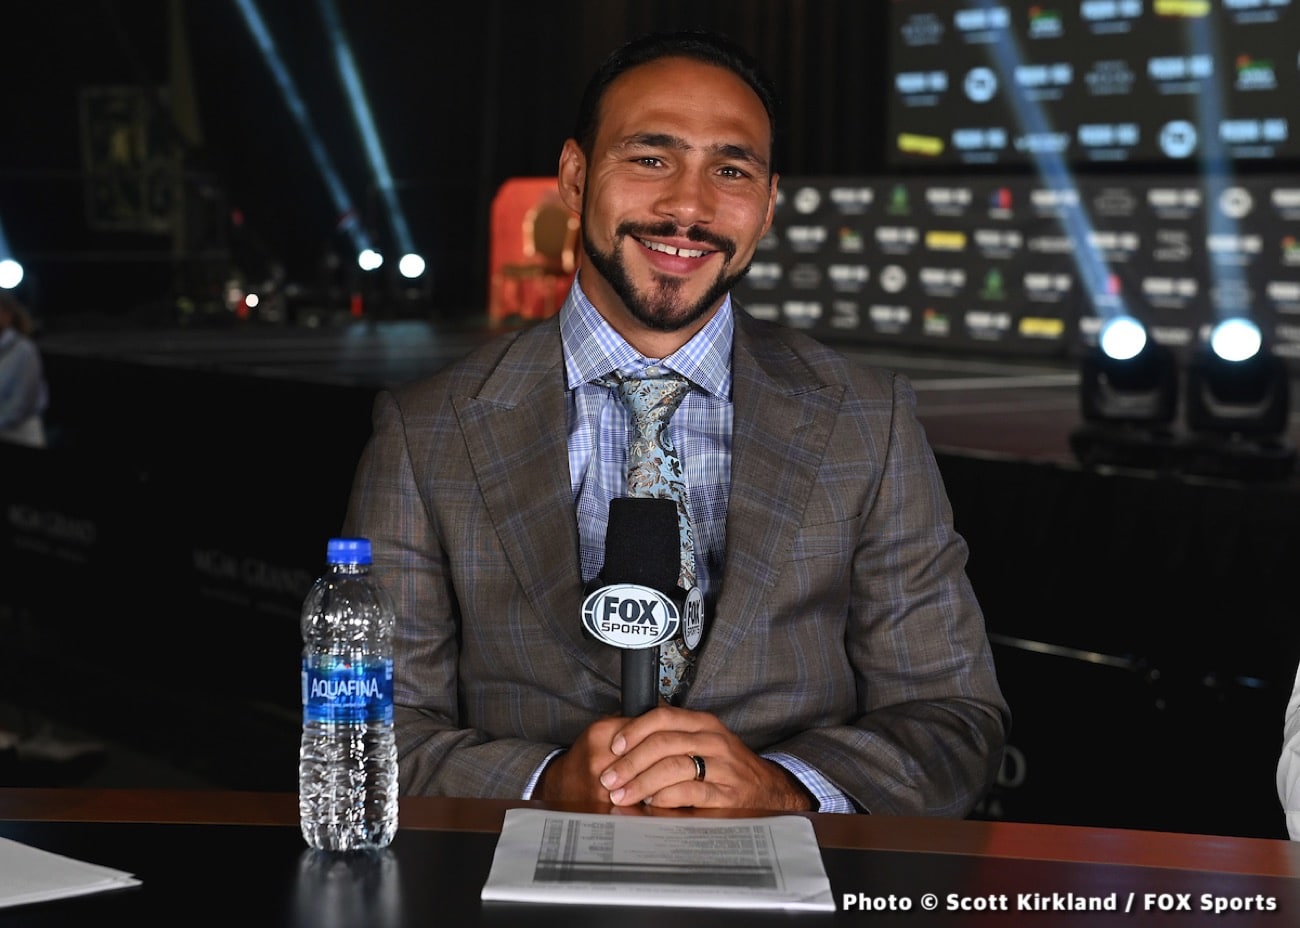 Keith Thurman fighting WBC title welterweight eliminator against Mario Barrios